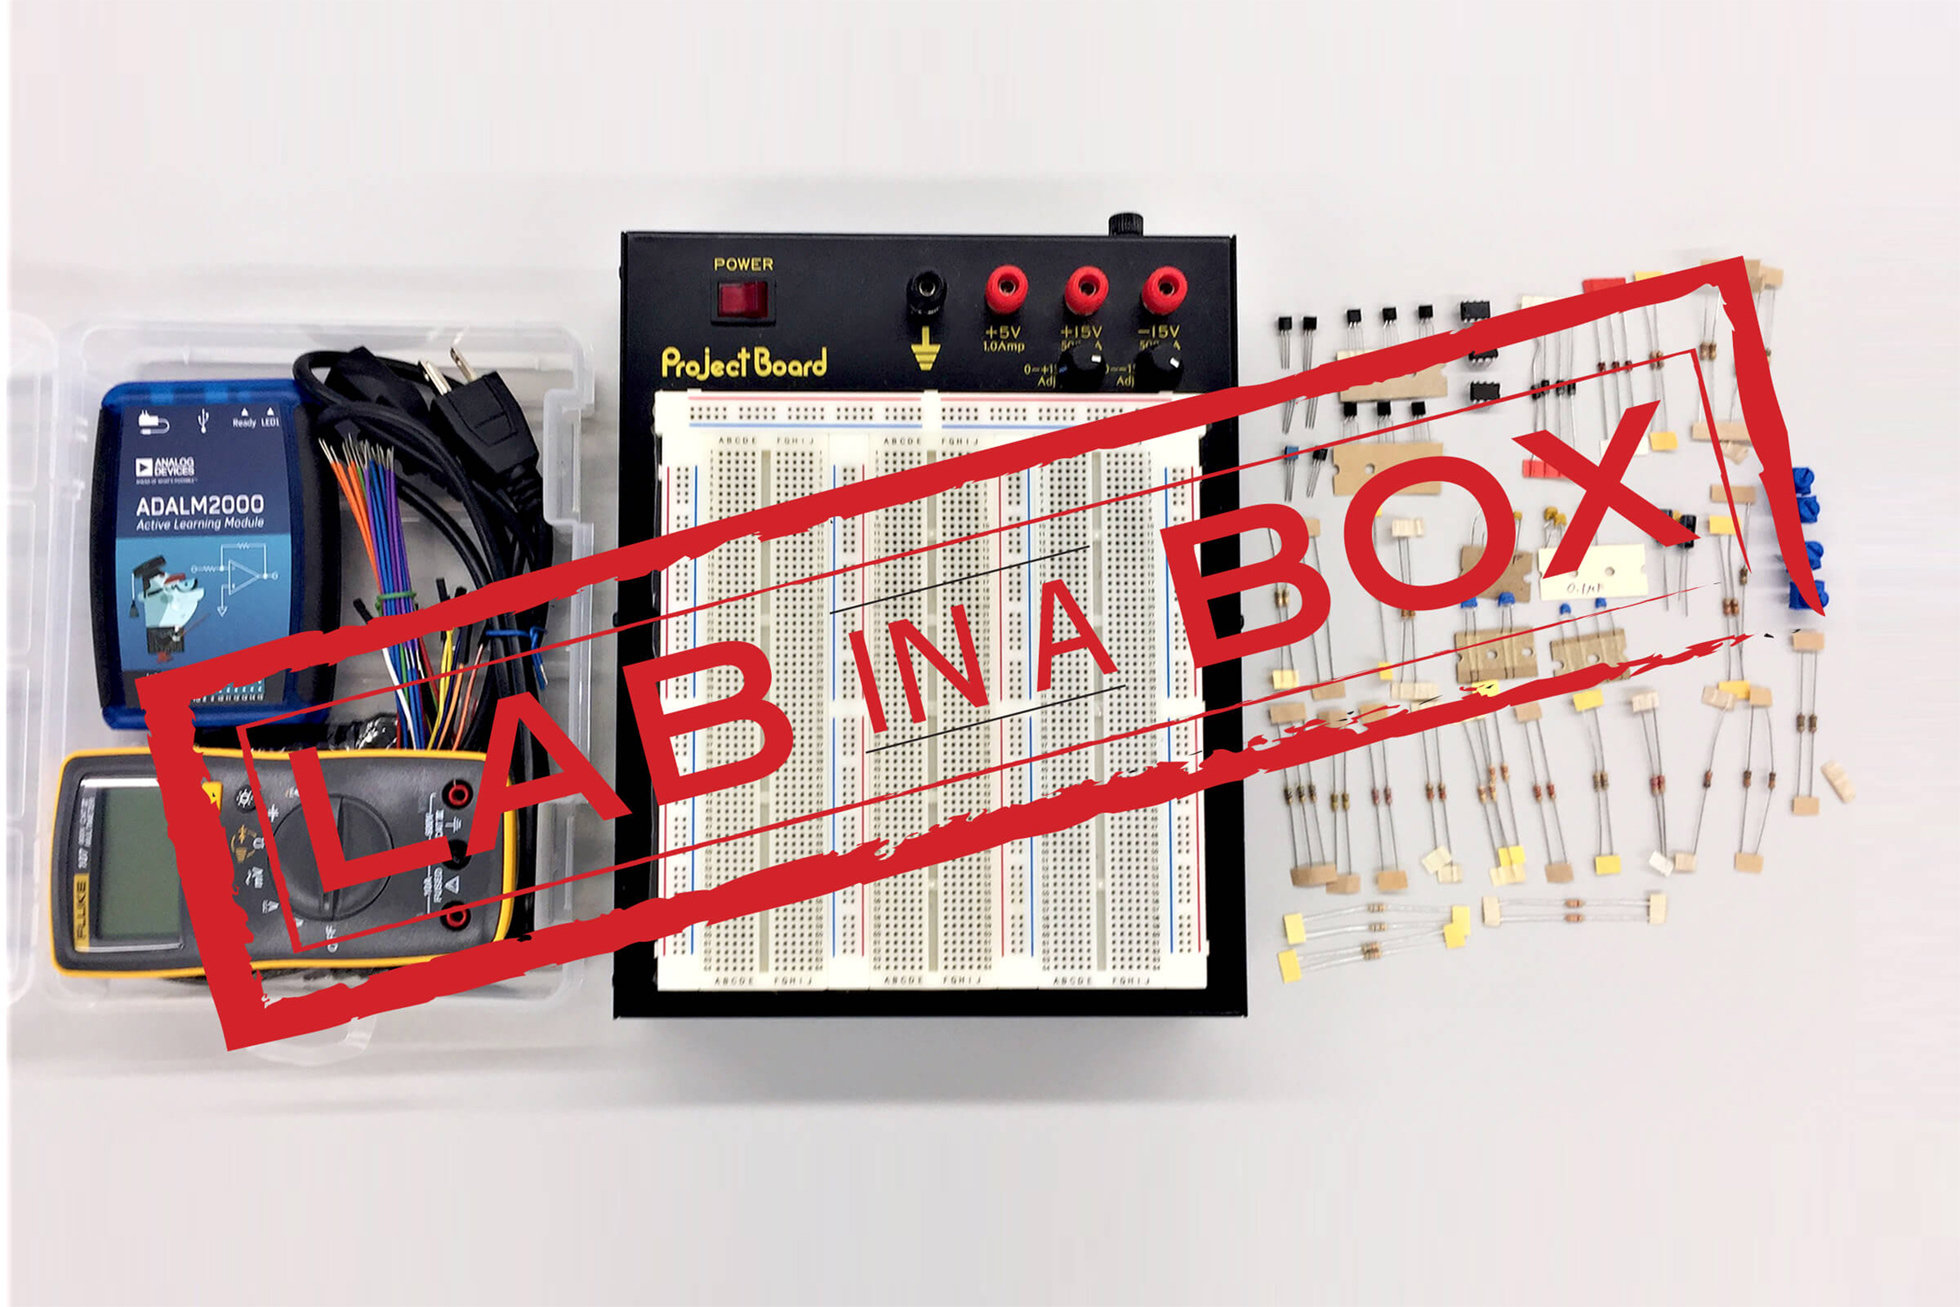 A photo of equipment in a box, with a red stamp over the image that reads lab in a box.